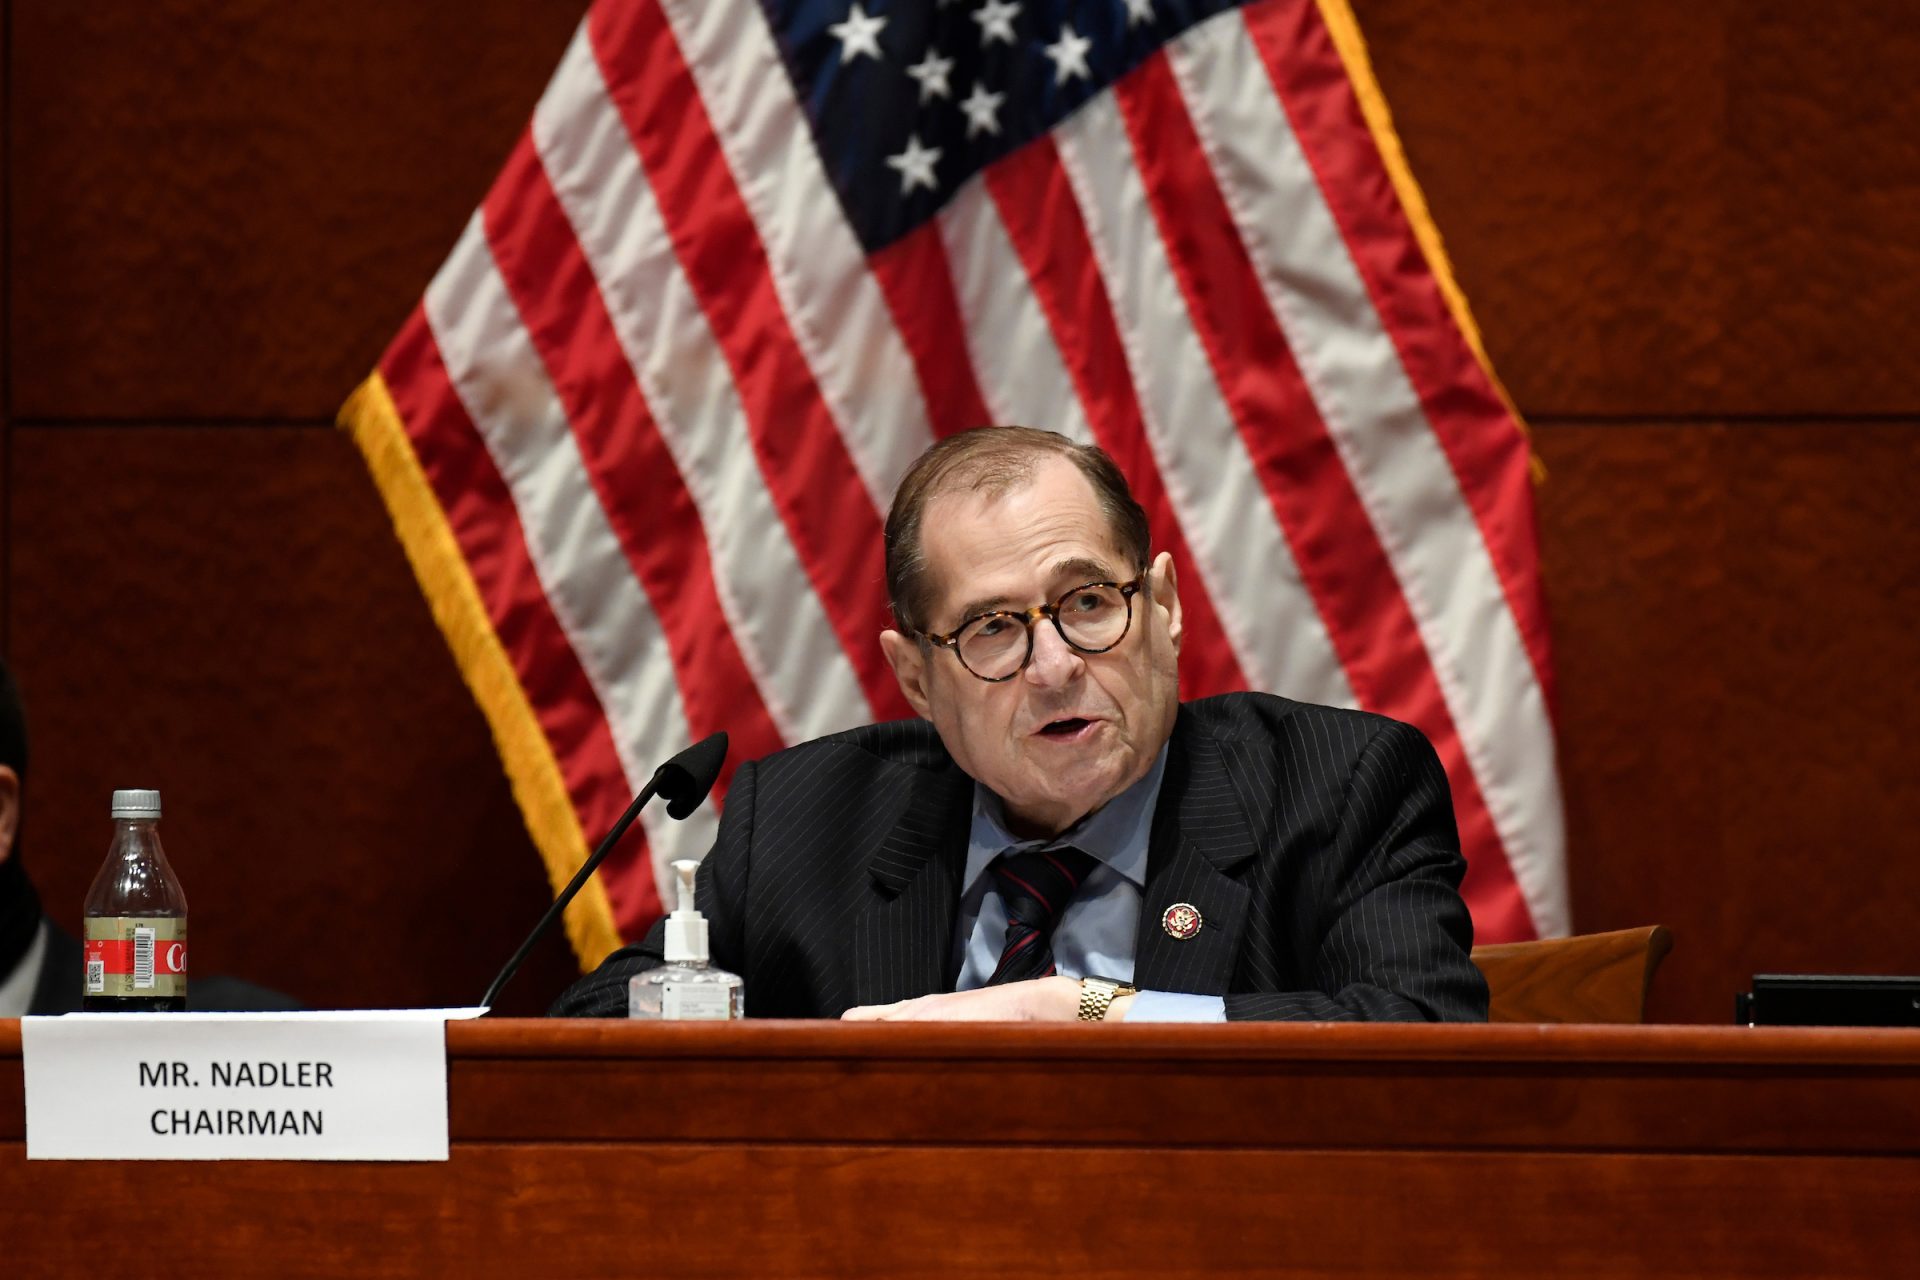 Judiciary Committee takes scheme at Barr over appearance delays